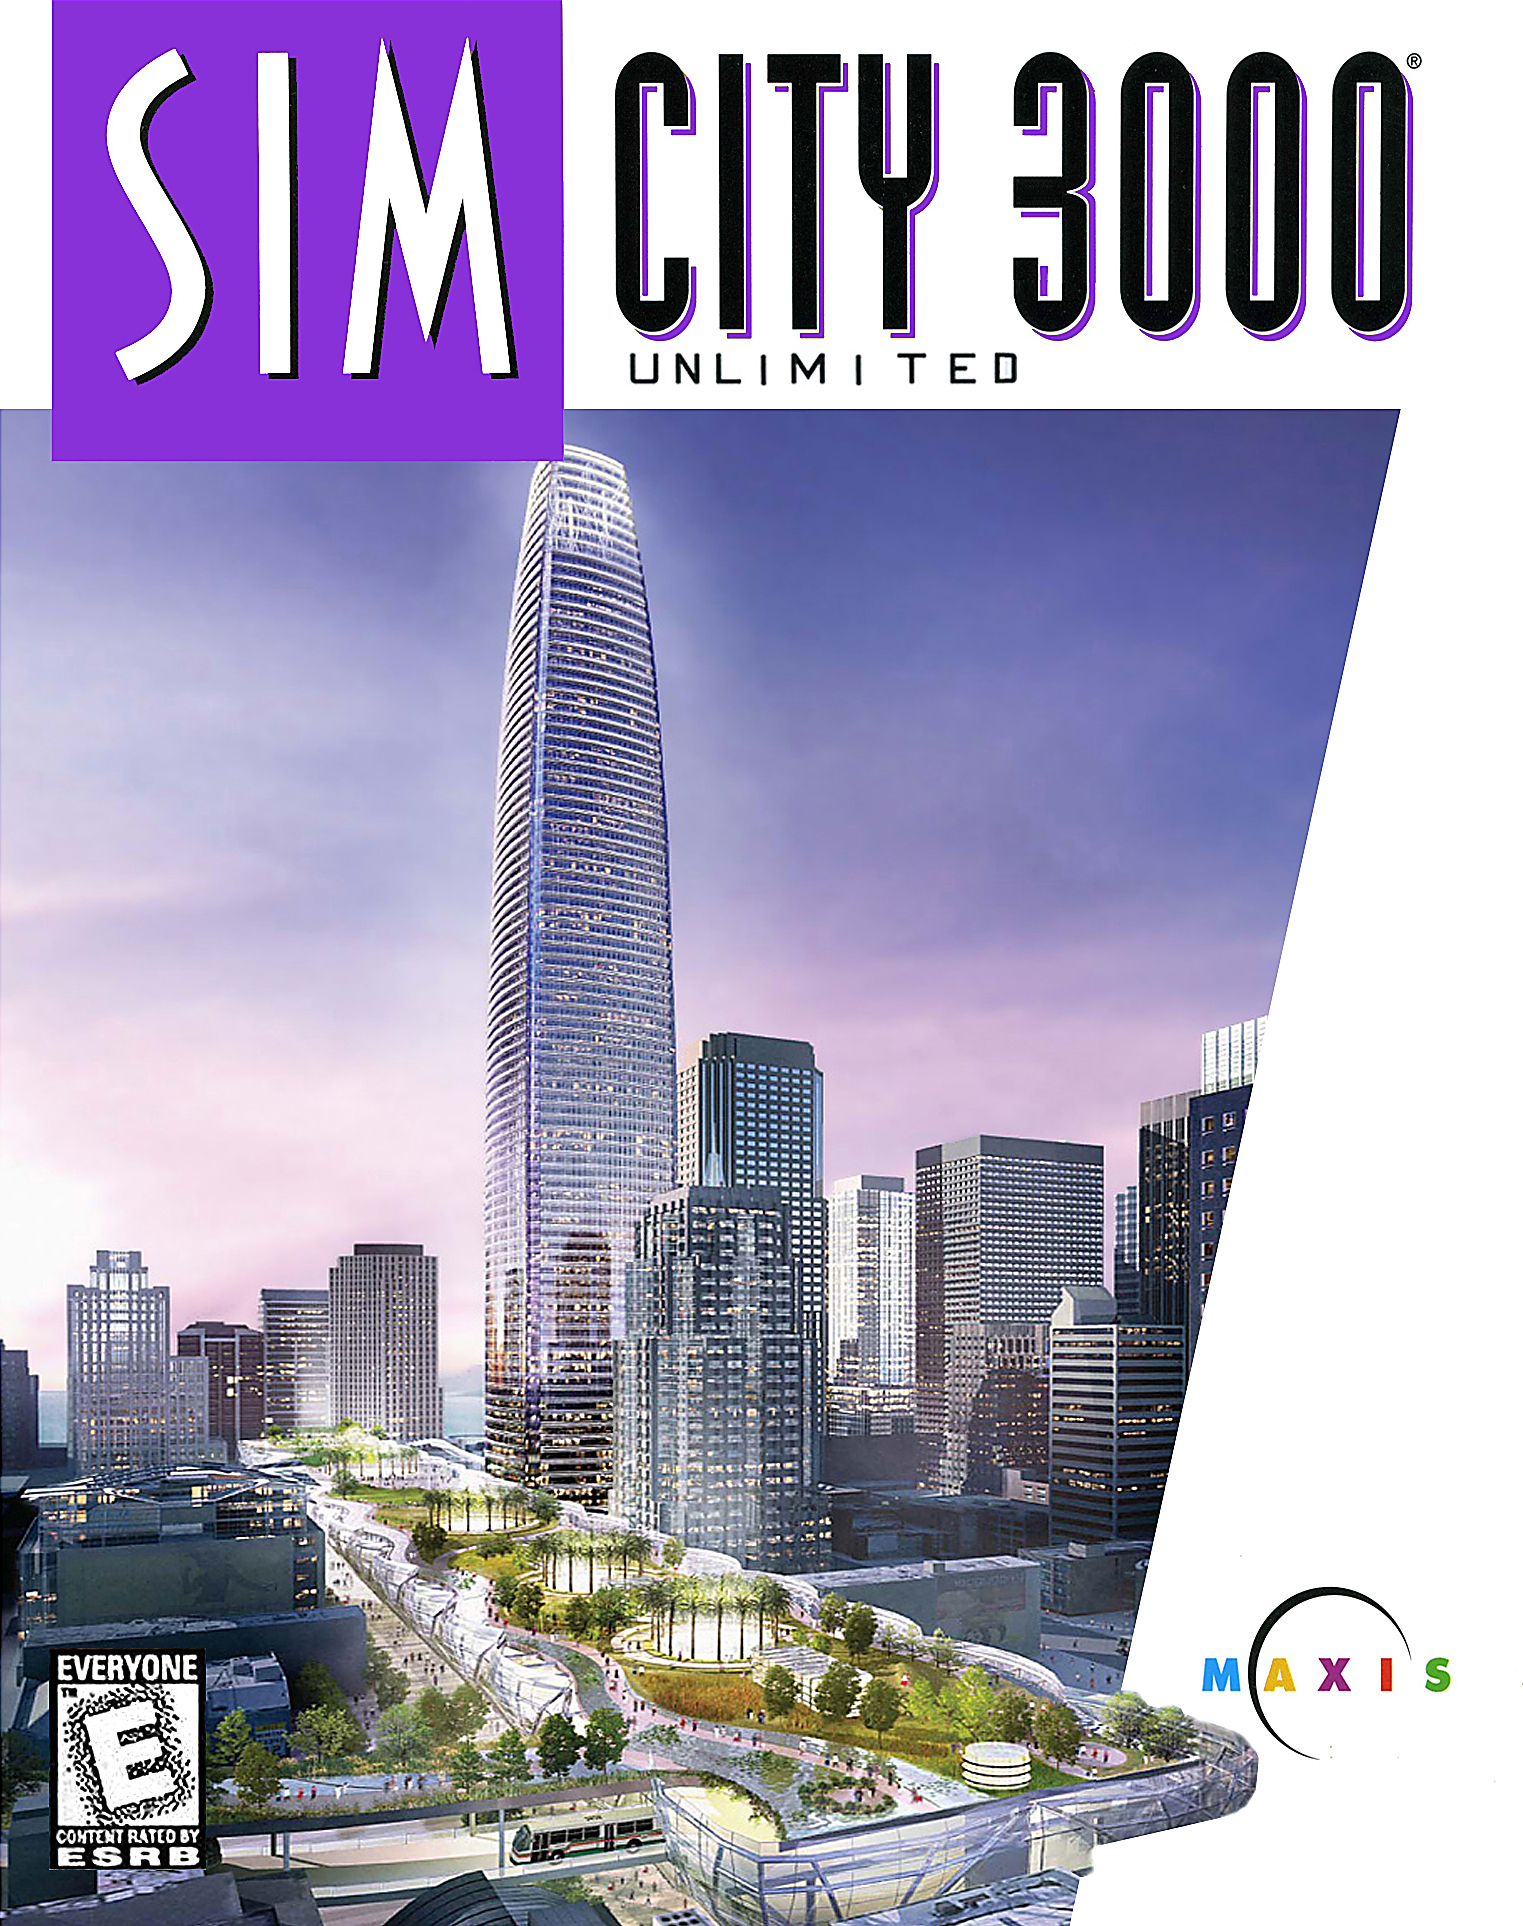 simcity 3000 unlimited free download